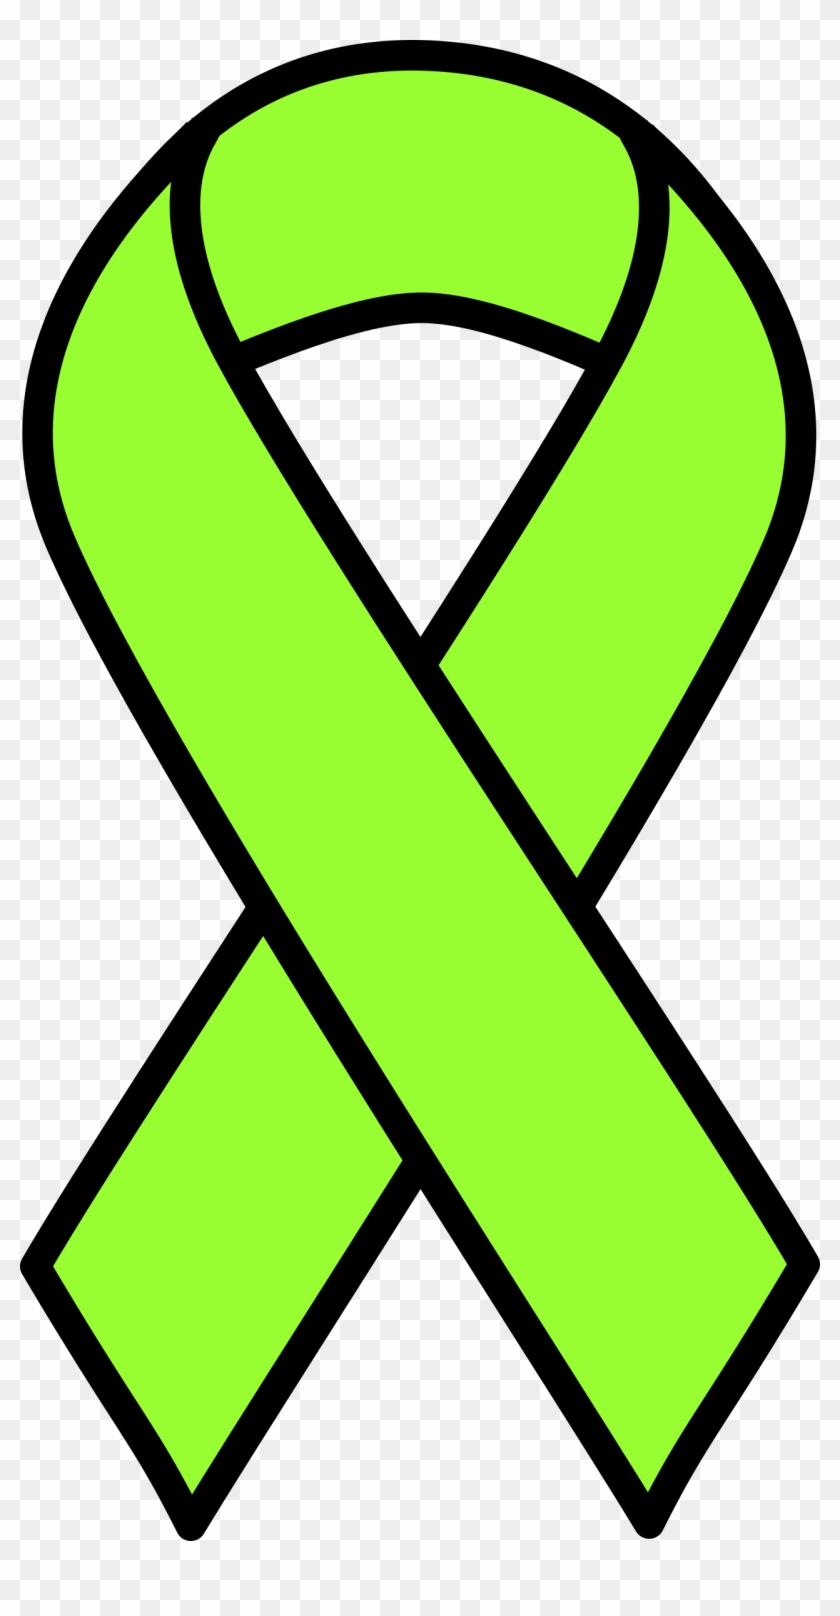 This Free Icons Png Design Of Lime Lymphoma Ribbon Clipart #999050